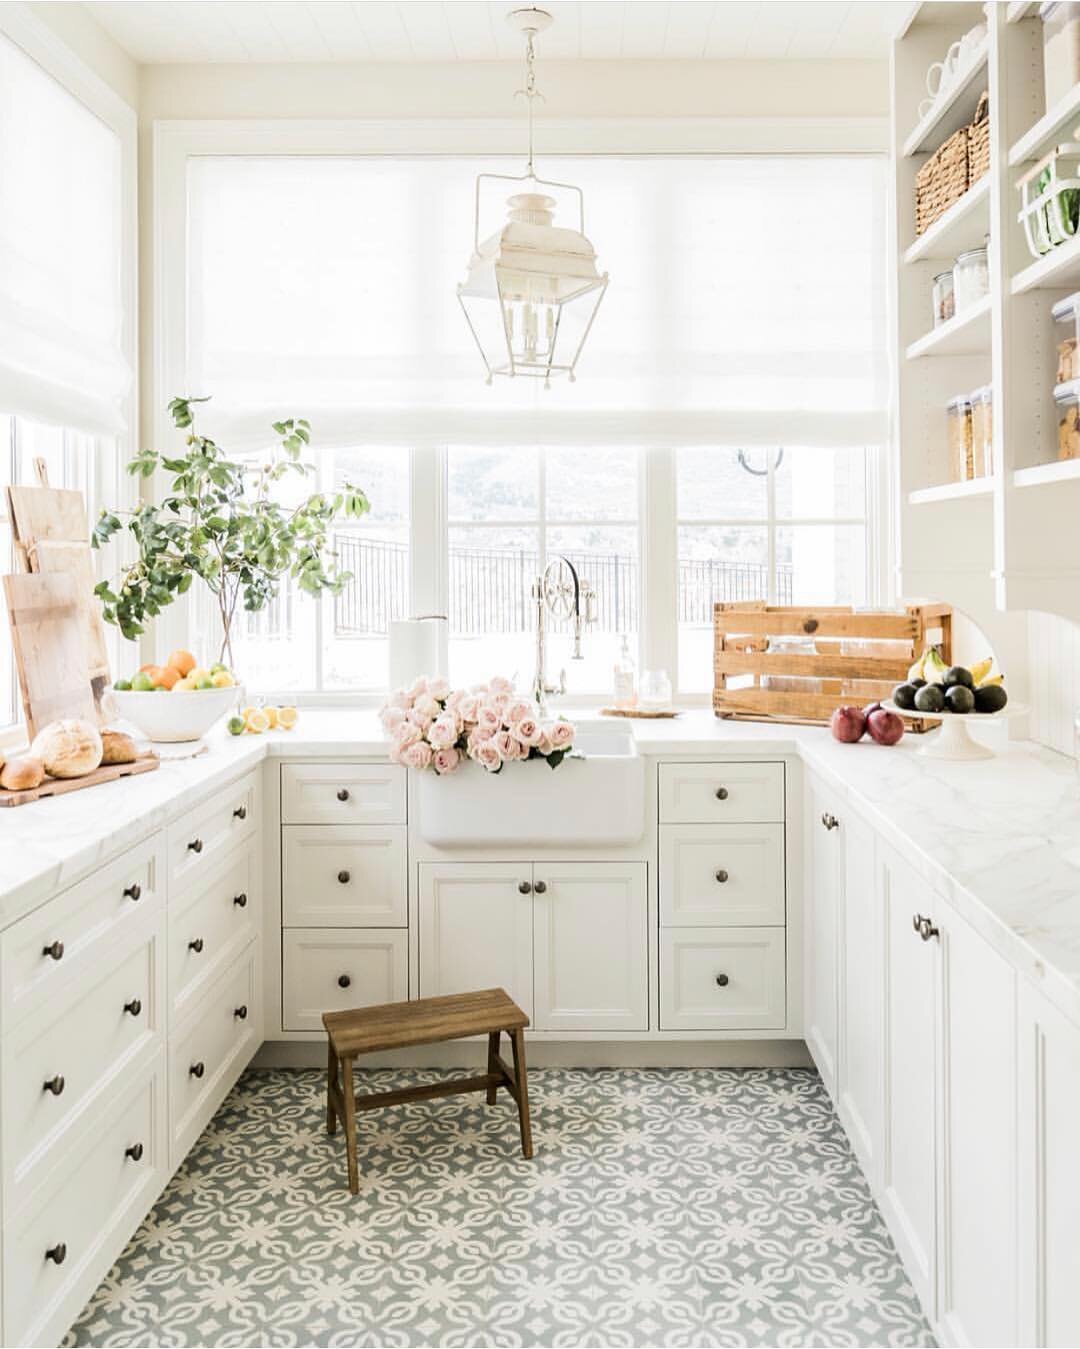 Love this bright white shaker! Kitchen inspo of the day!